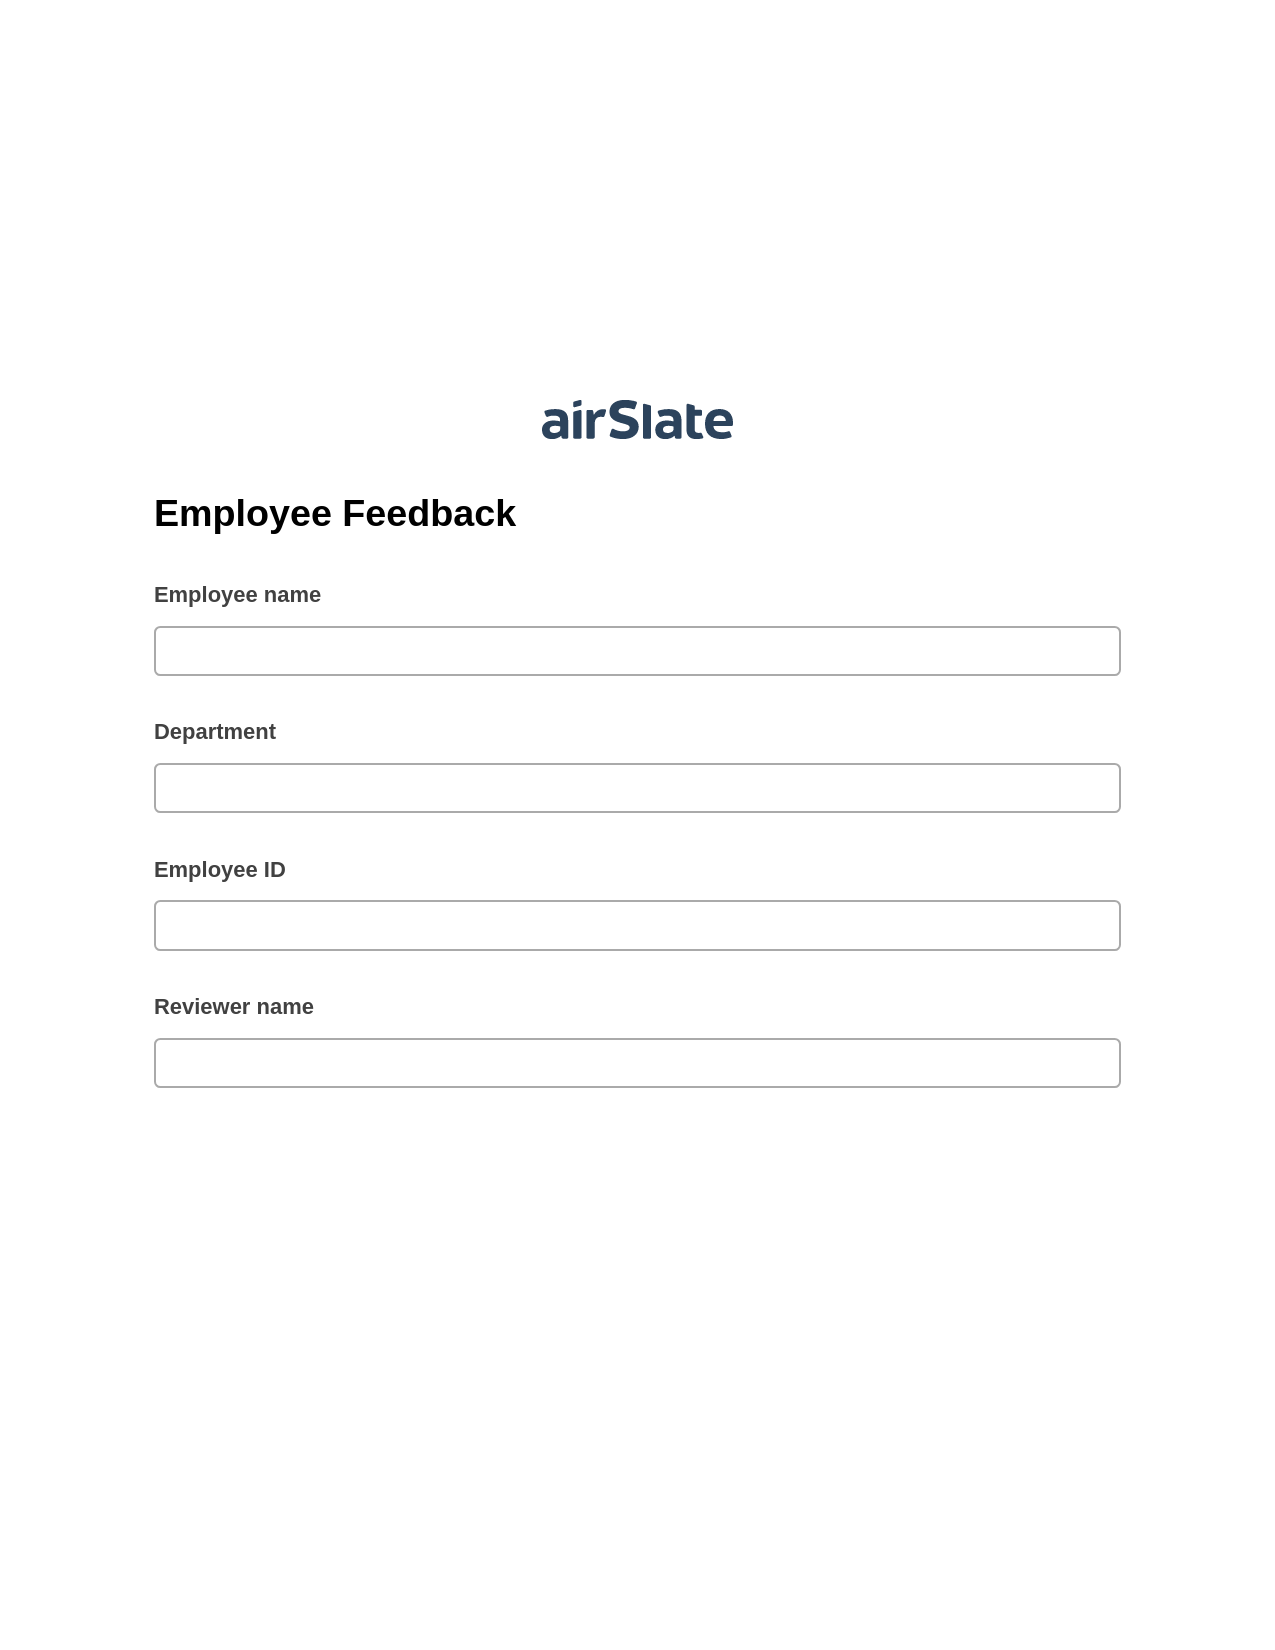 Employee Feedback Pre-fill from Google Sheet Dropdown Options Bot, Send a Slate to Salesforce Contact Bot, Archive to SharePoint Folder Bot